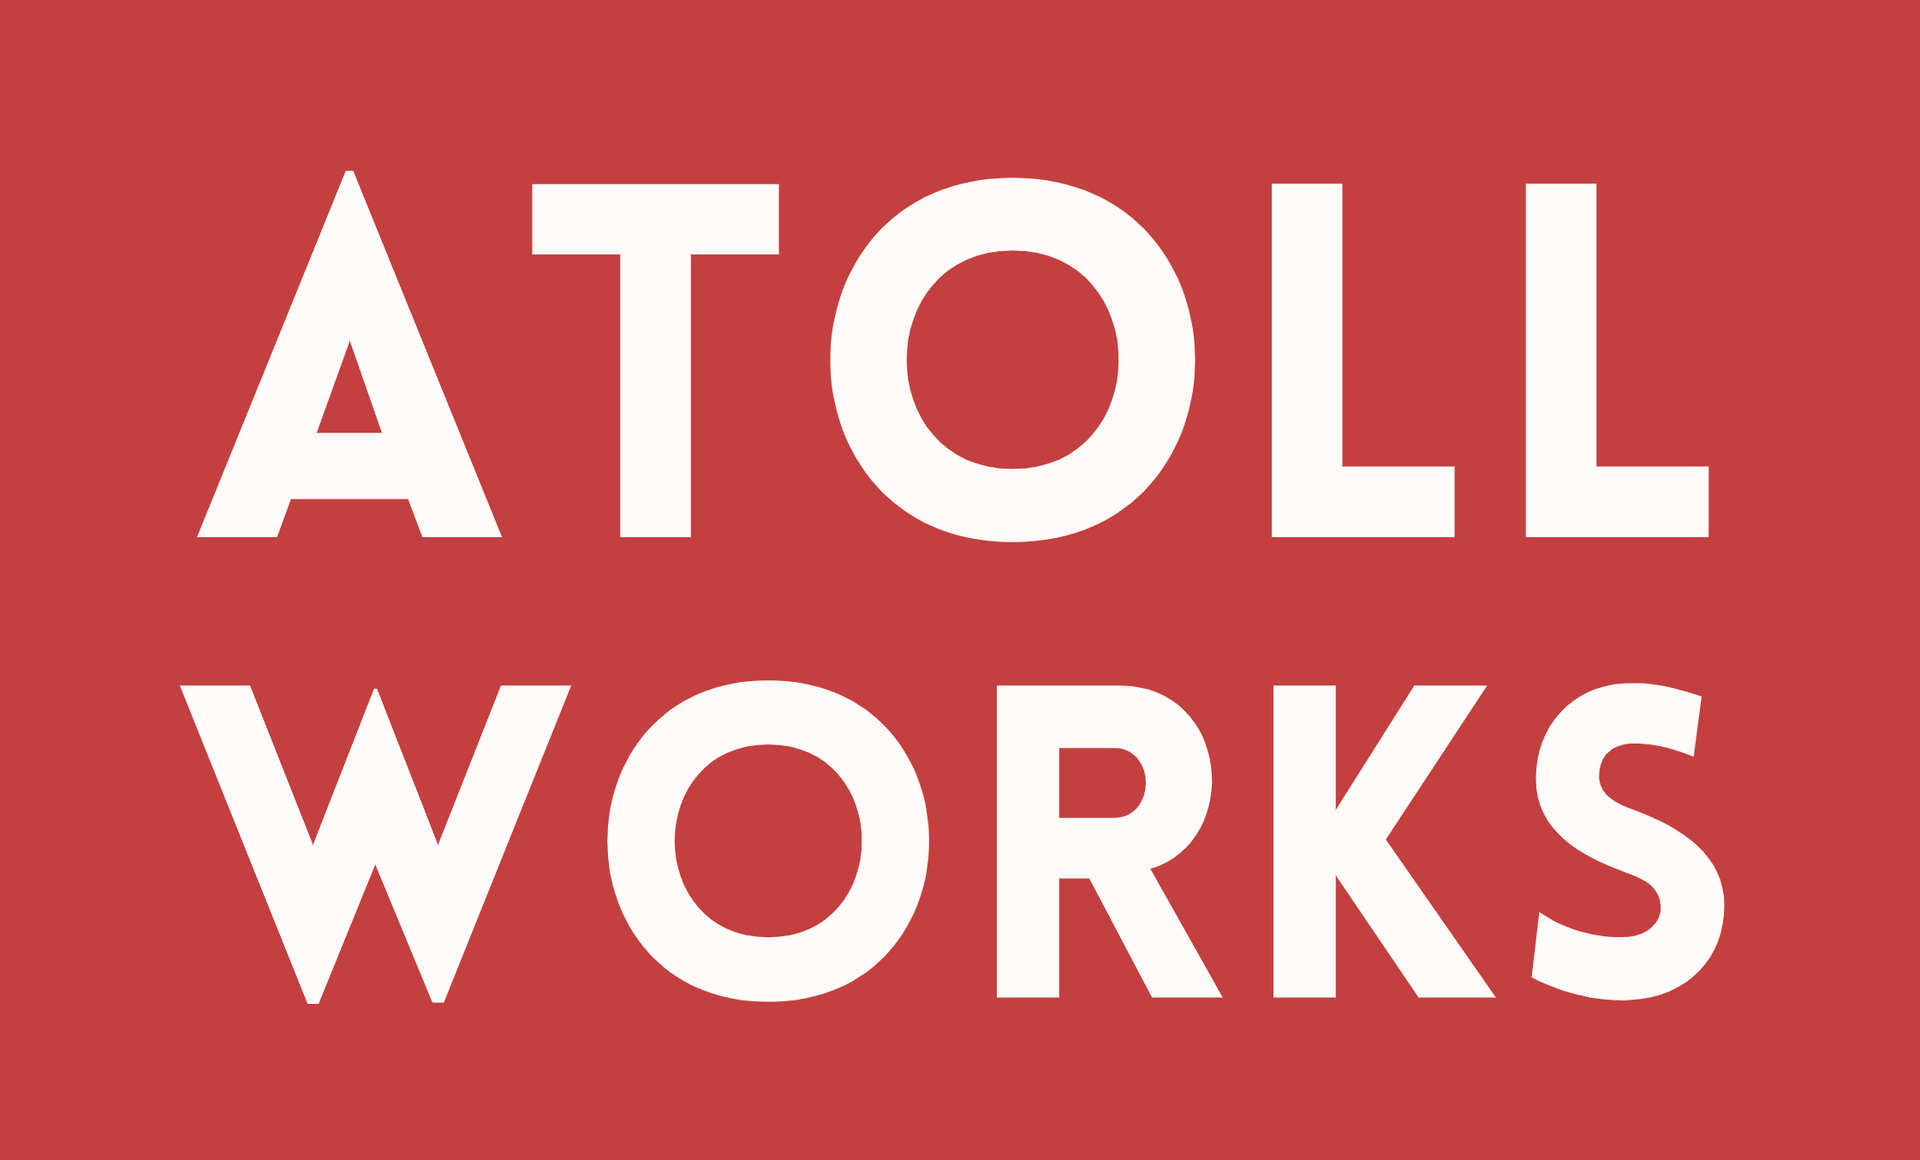 A red background with white letters that say atoll works